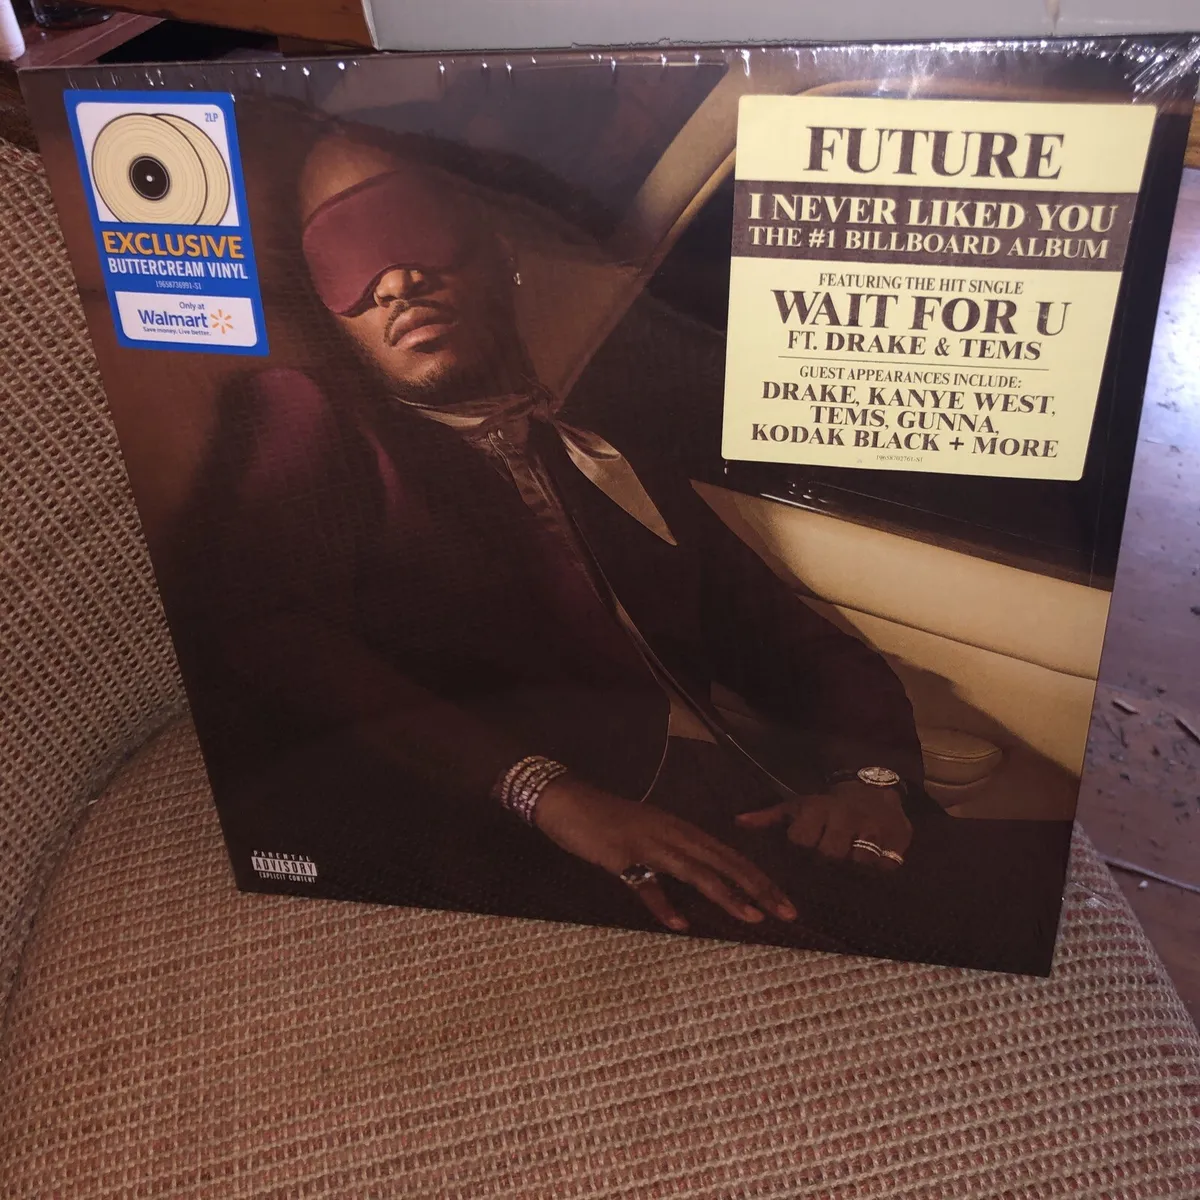 Seal　I　Liked　(New/Minor　Future　In　LP　Rip　Vinyl　Never　Unopened　eBay　You　But